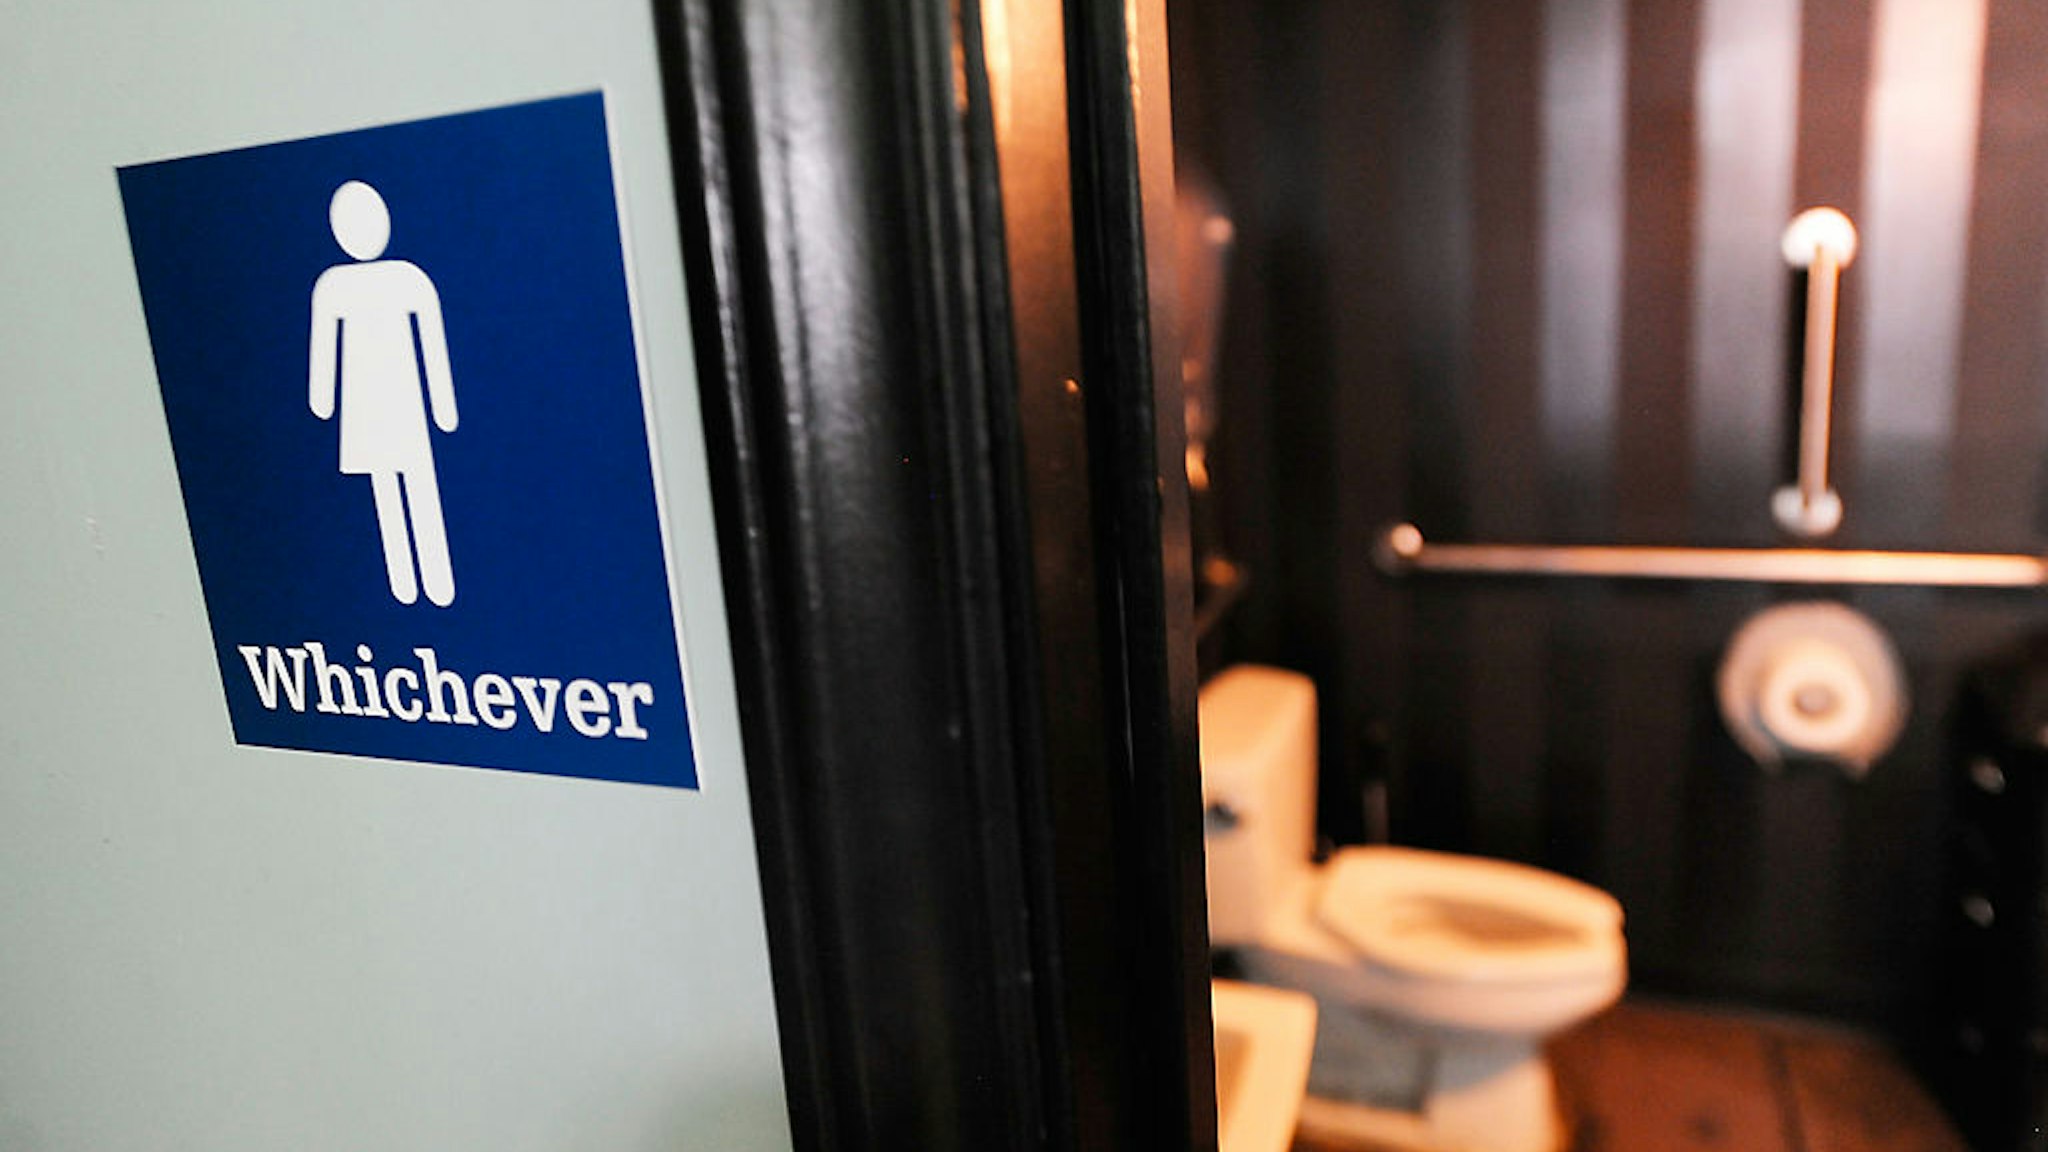 DURHAM, NC - MAY 11: A gender neutral sign is posted outside a bathrooms at Oval Park Grill on May 11, 2016 in Durham, North Carolina. Debate over transgender bathroom access spreads nationwide as the U.S. Department of Justice countersues North Carolina Governor Pat McCrory from enforcing the provisions of House Bill 2 (HB2) that dictate what bathrooms transgender individuals can use. (Photo by Sara D. Davis/Getty Images)